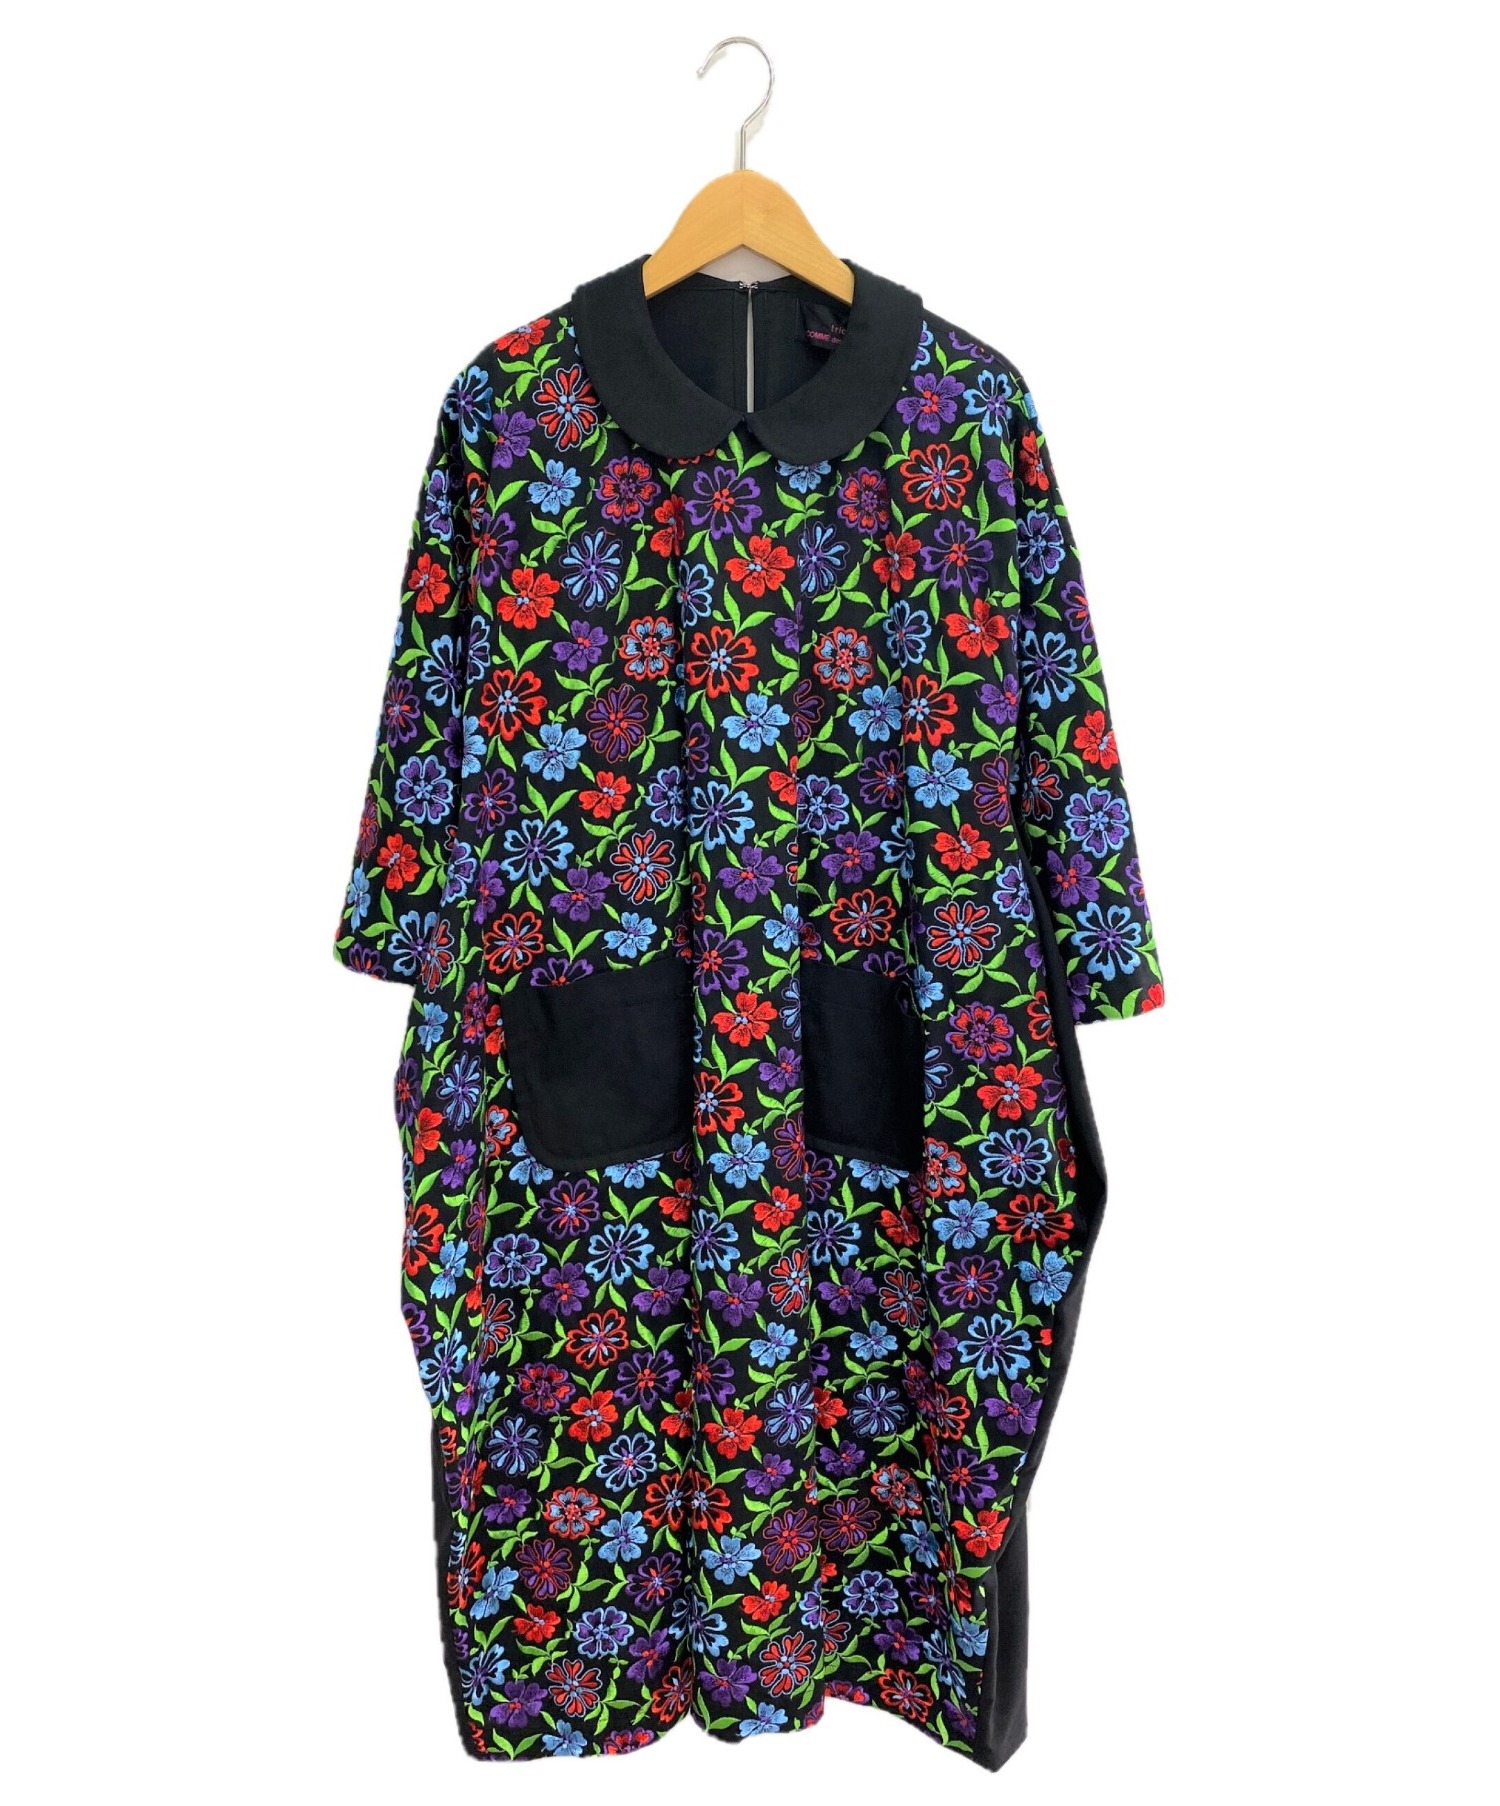 tricot comme des garsons 花柄ワンピース 割引購入 68.0%OFF